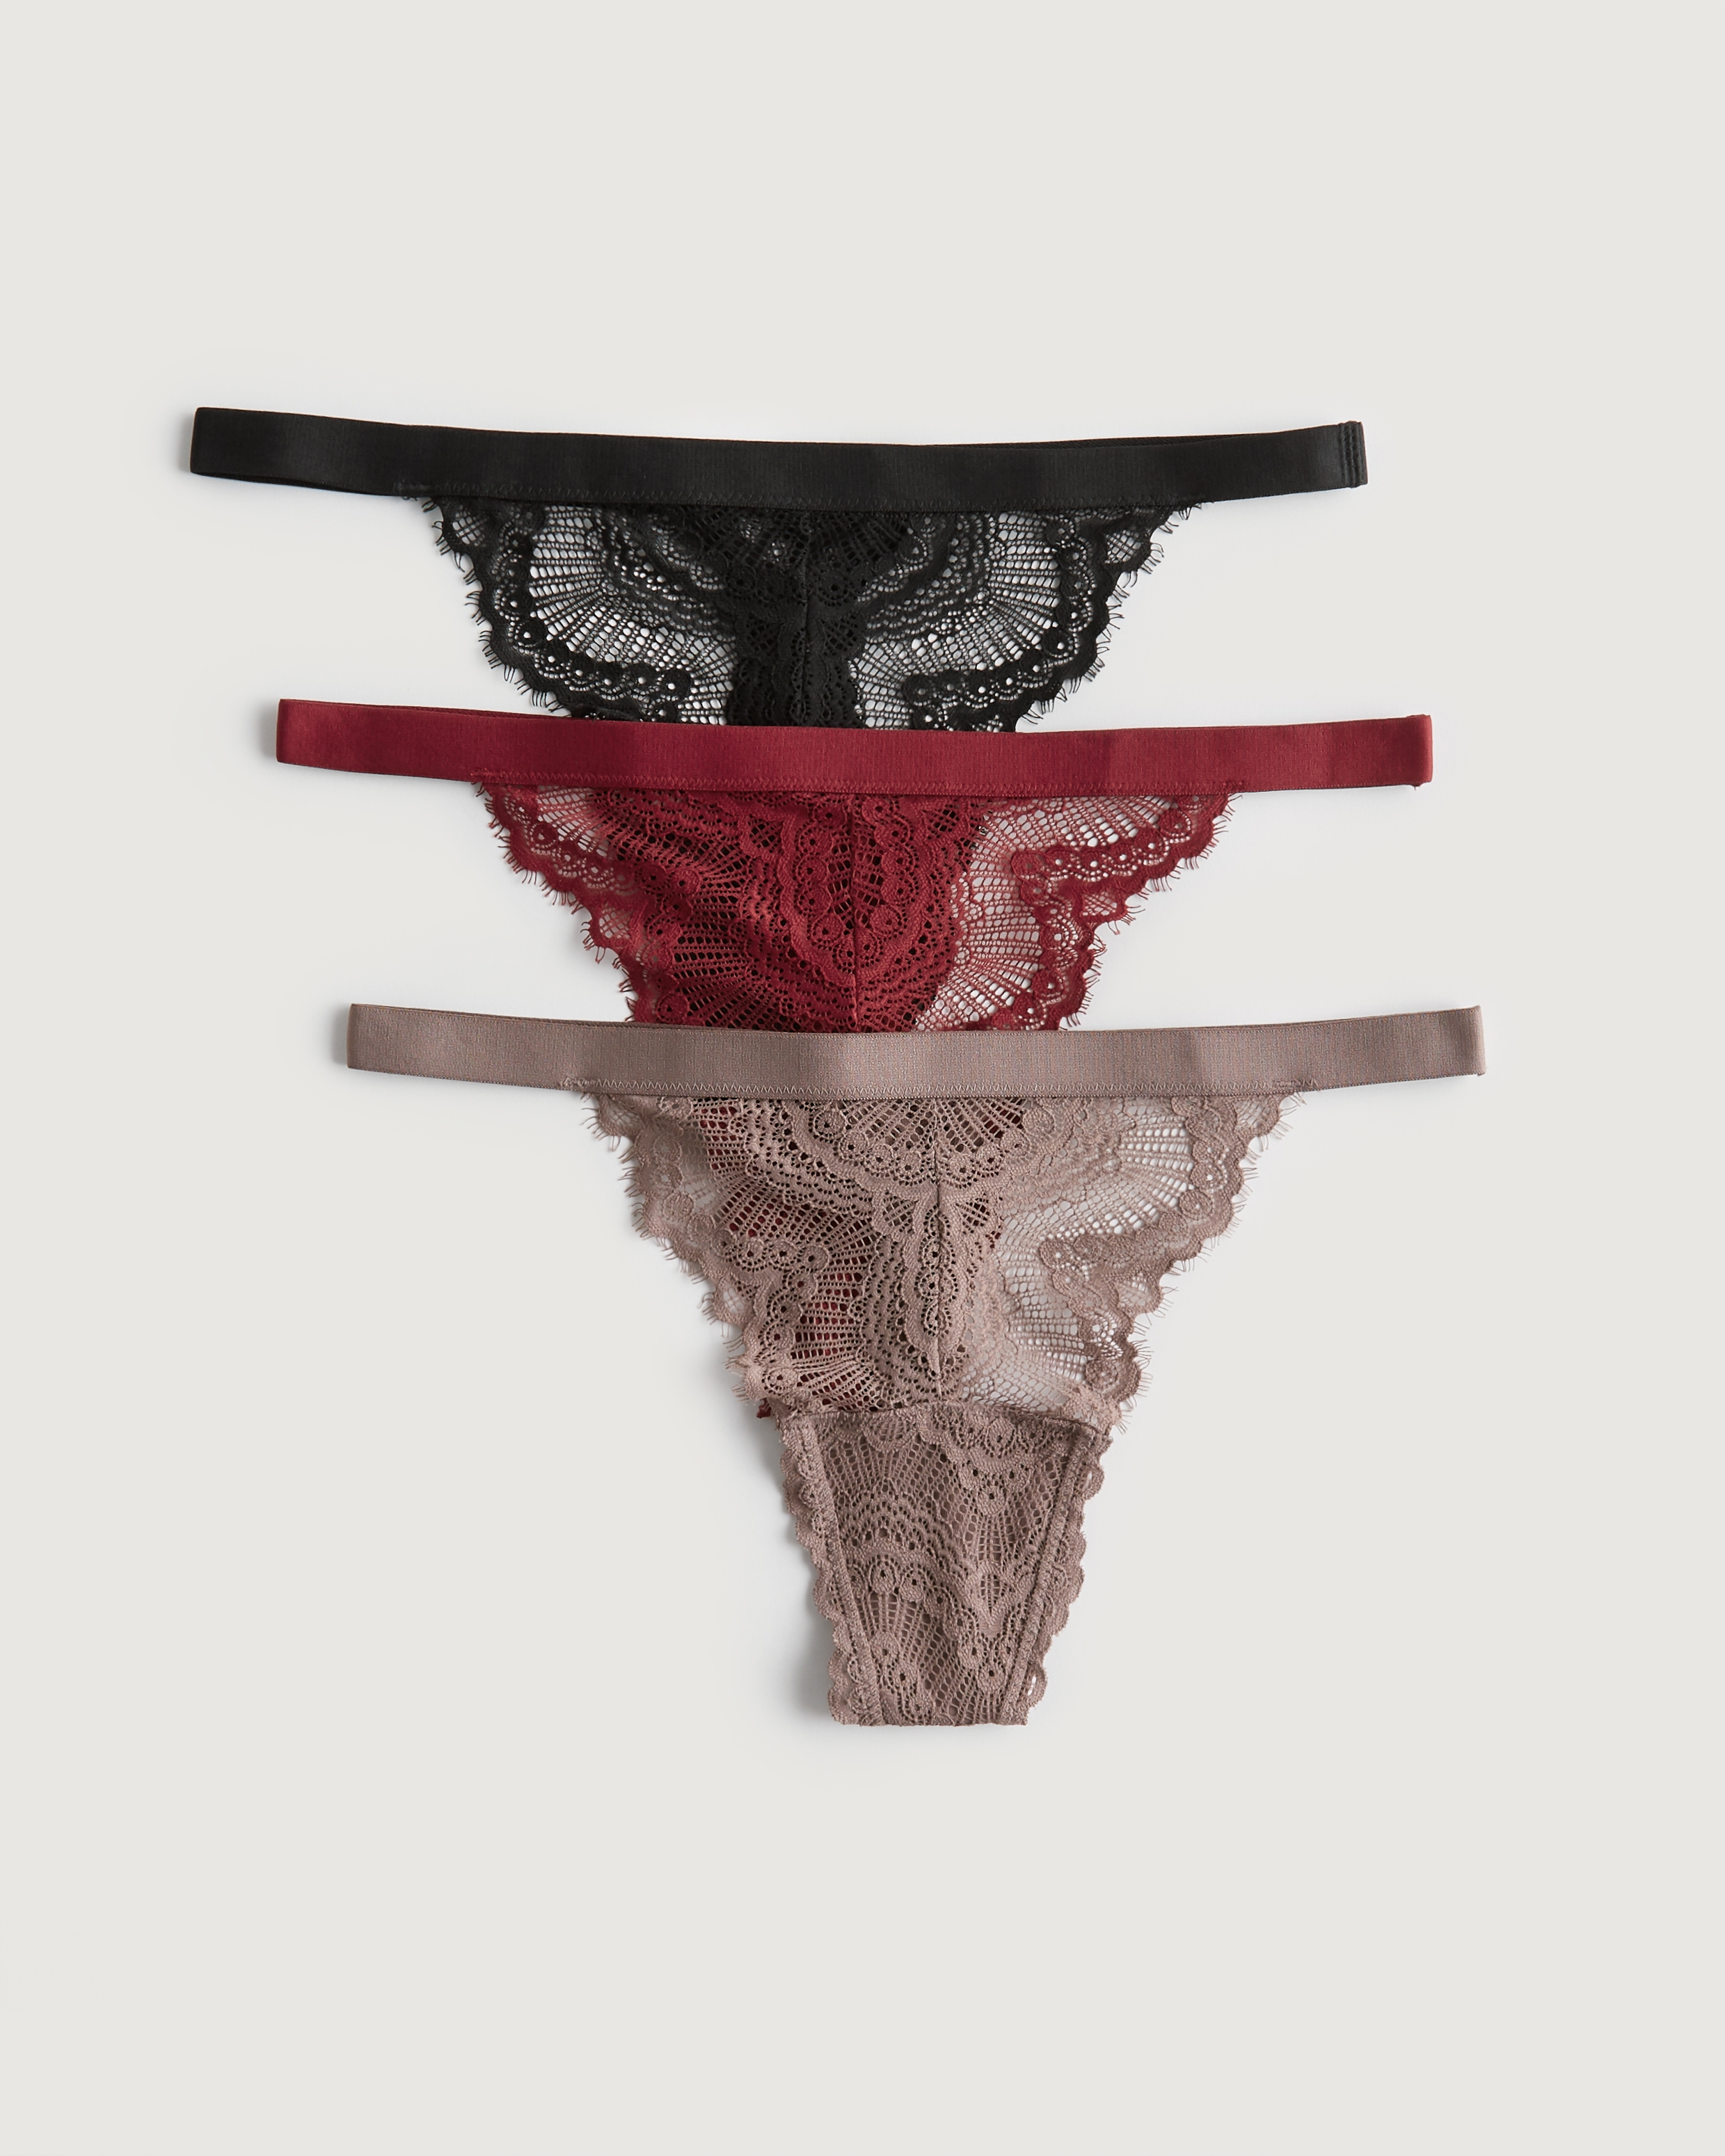 Gilly Hicks Lace String Thong Underwear 3-Pack